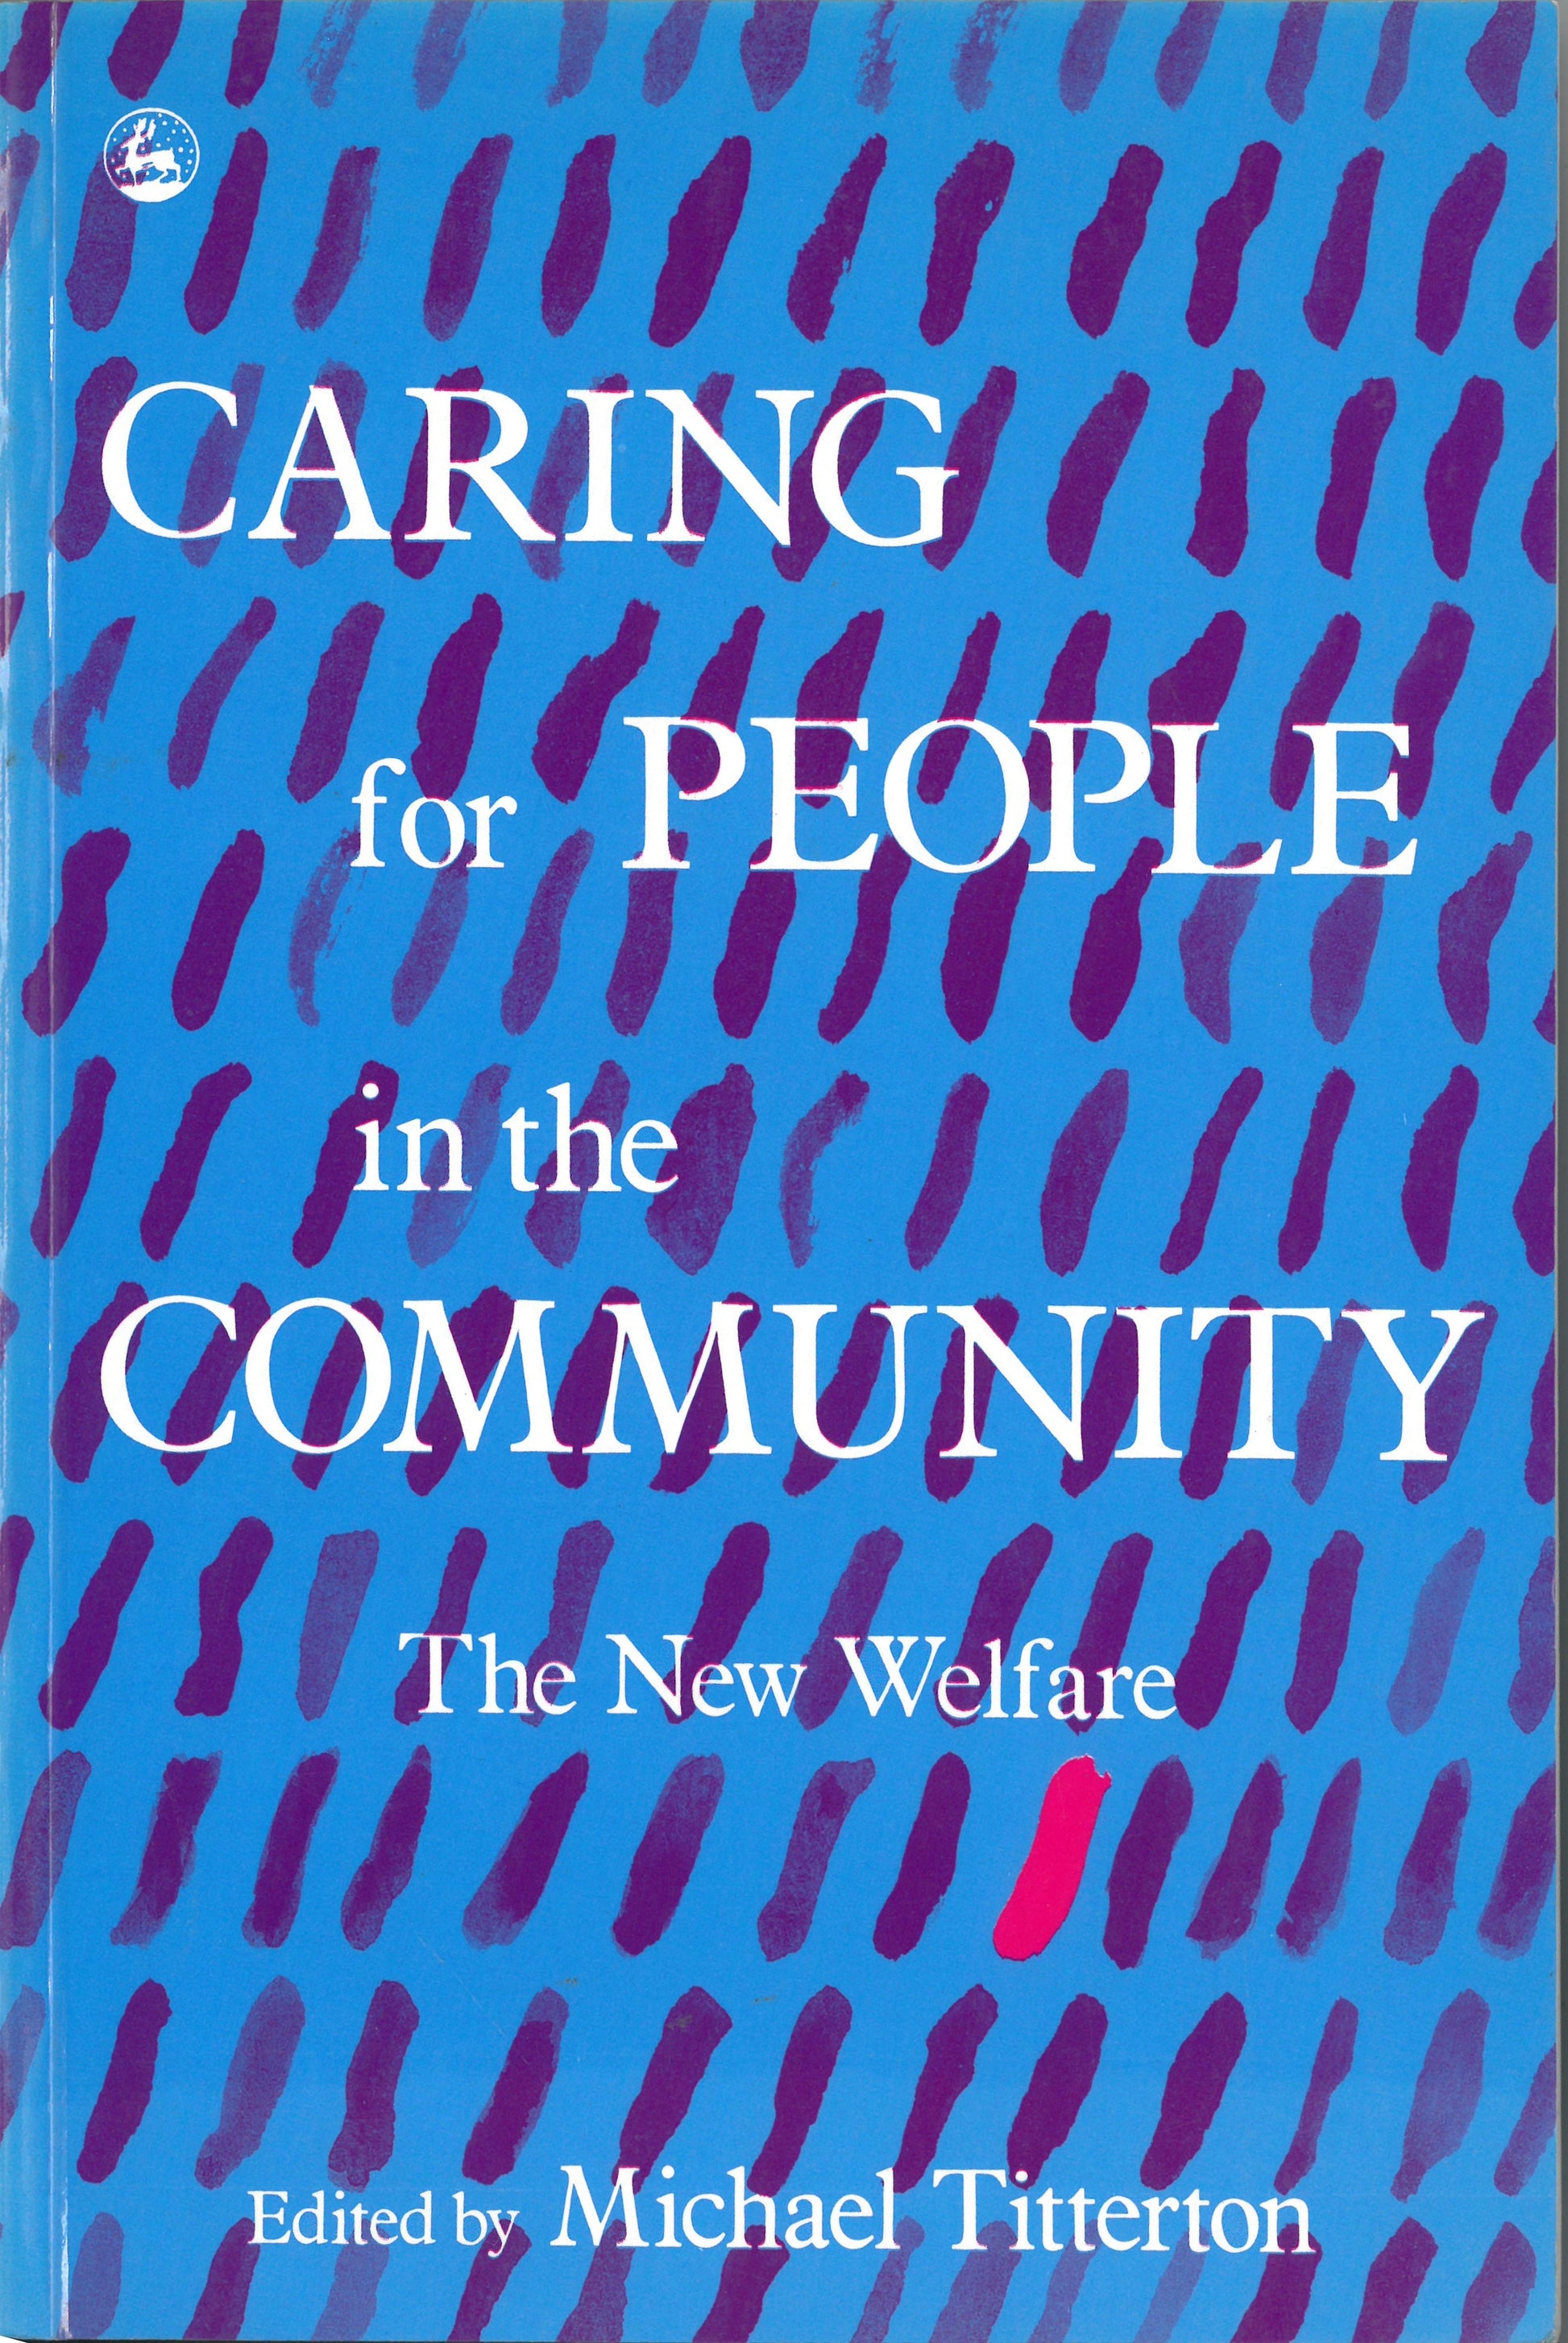 Caring for People in the Community by Mike Titterton